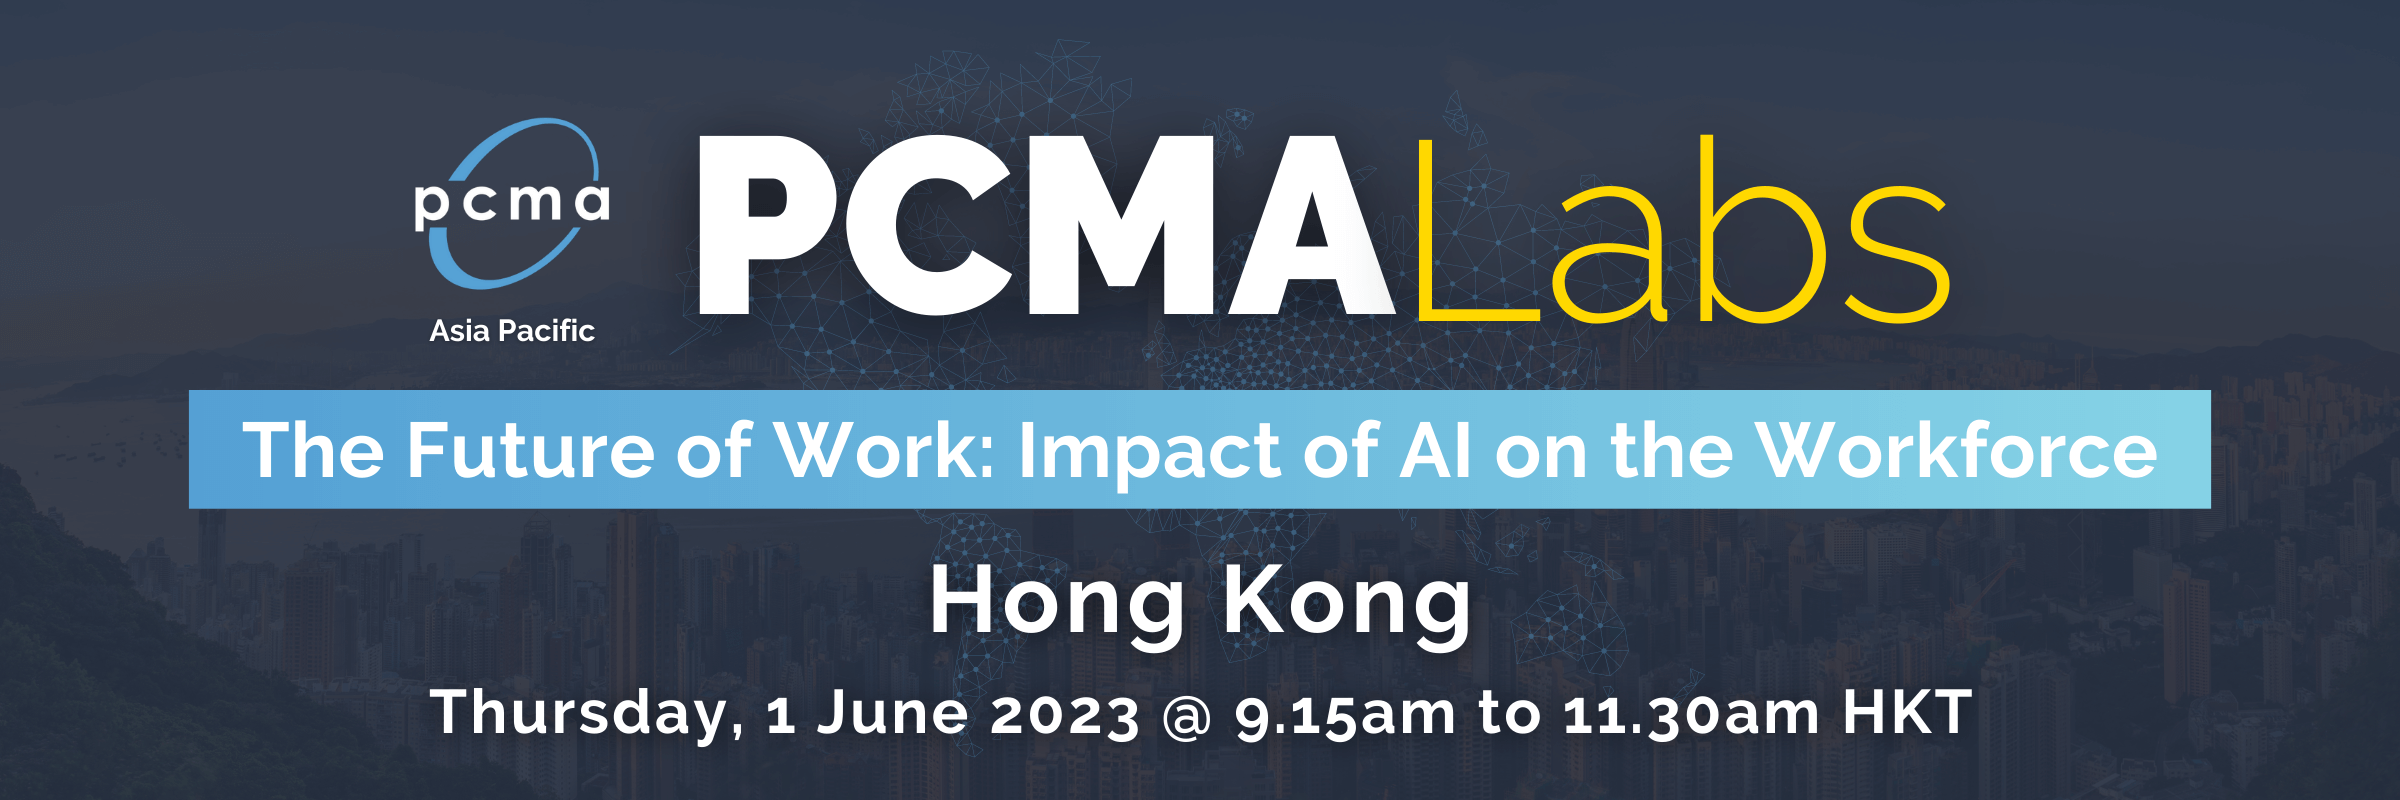 PCMA APAC Labs (Hong Kong) - The Future of Work: Impact of AI on the Workforce on 1 June 2023